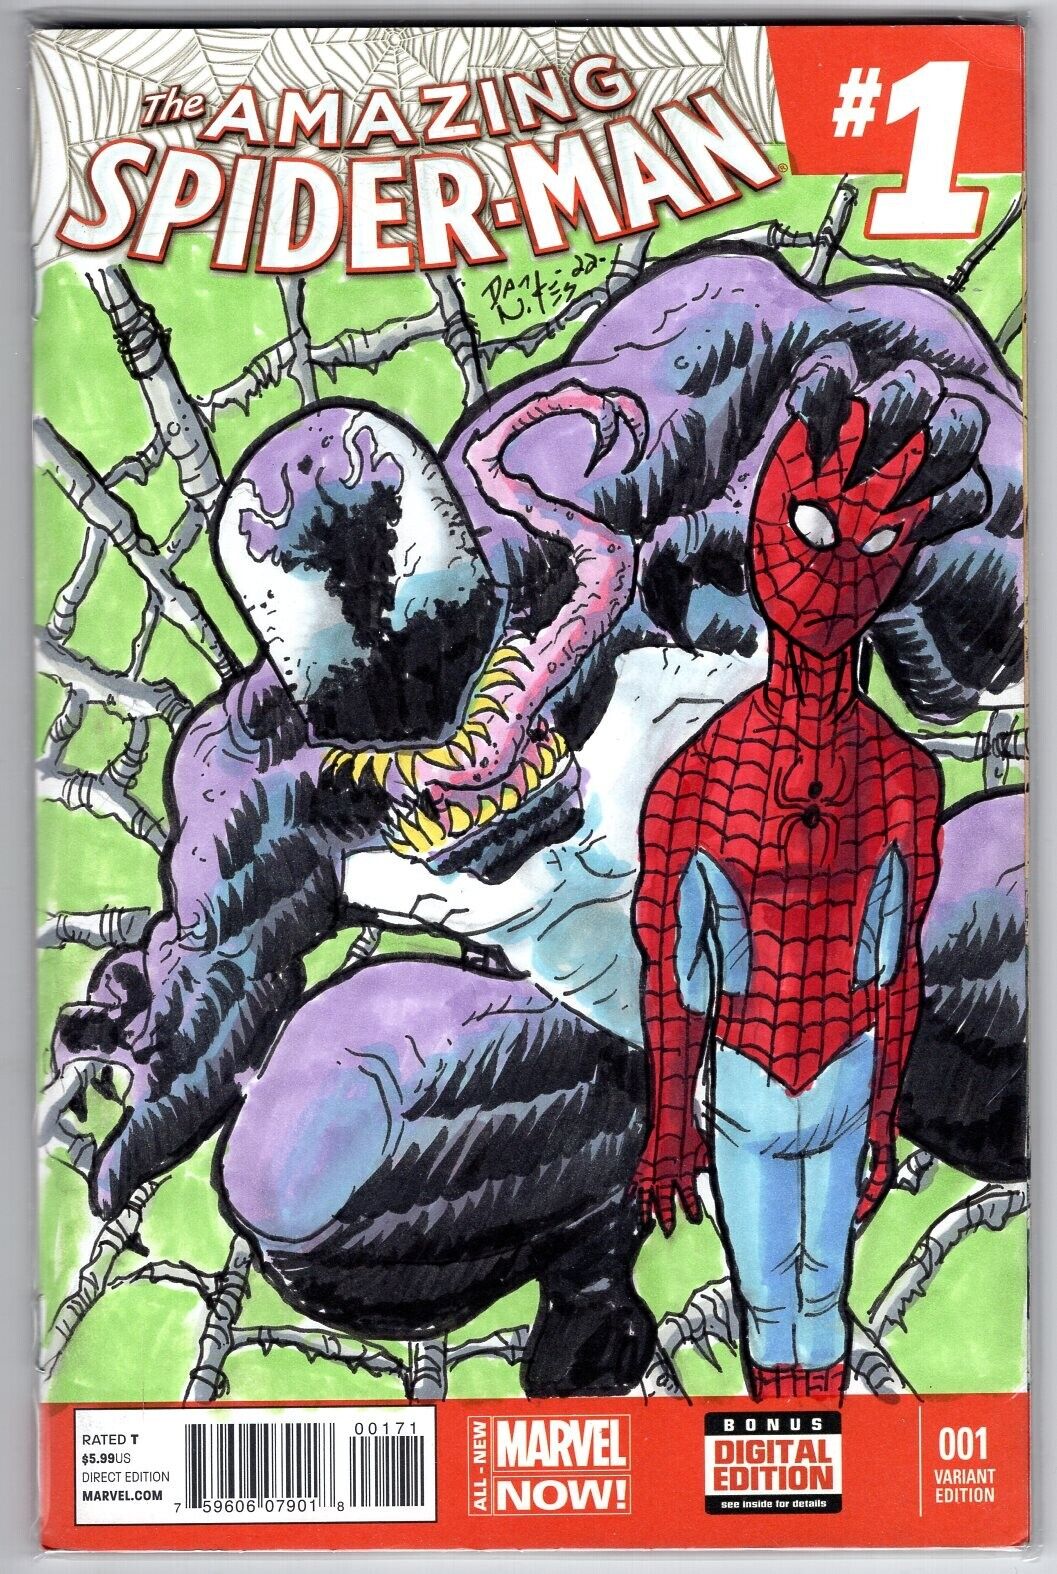 ONE-OF-A-KIND HAND-DRAWN, INKED AND COLORED SKETCHCOVER COMIC by Dan Nokes